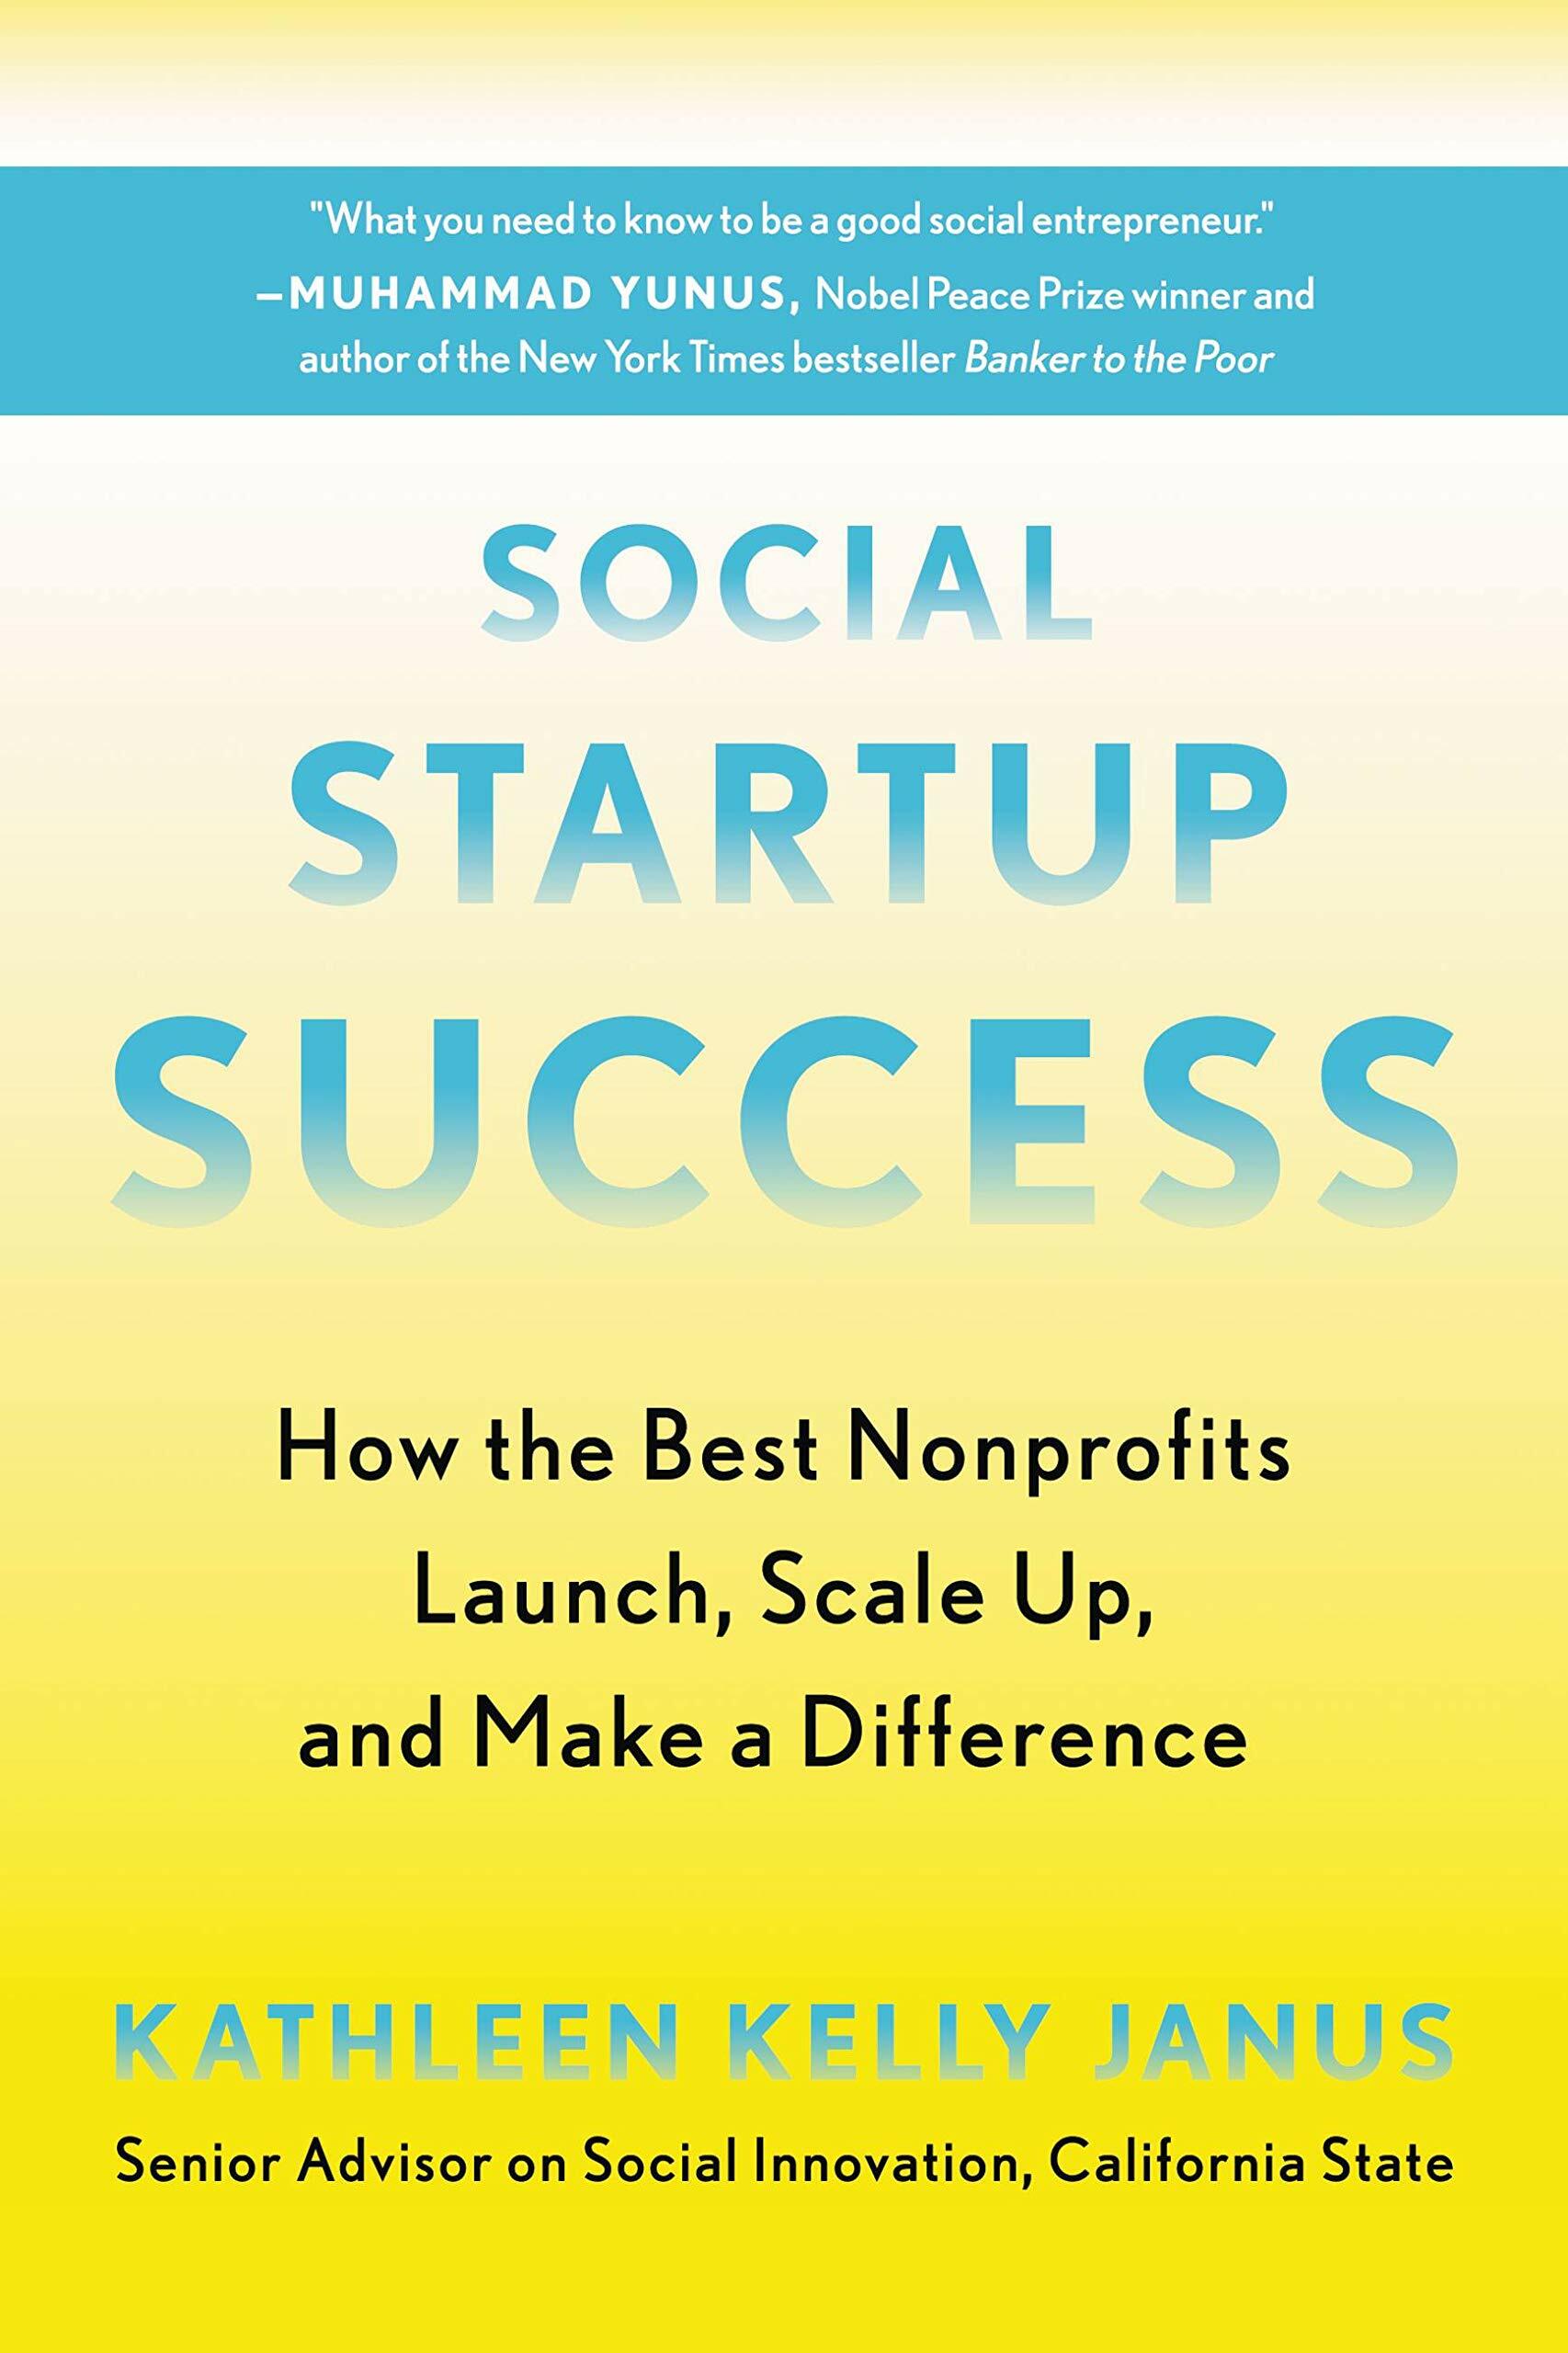 Social Startup Success: How the Best Nonprofits Launch, Scale Up, and Make a Difference (Mass Market Paperback)